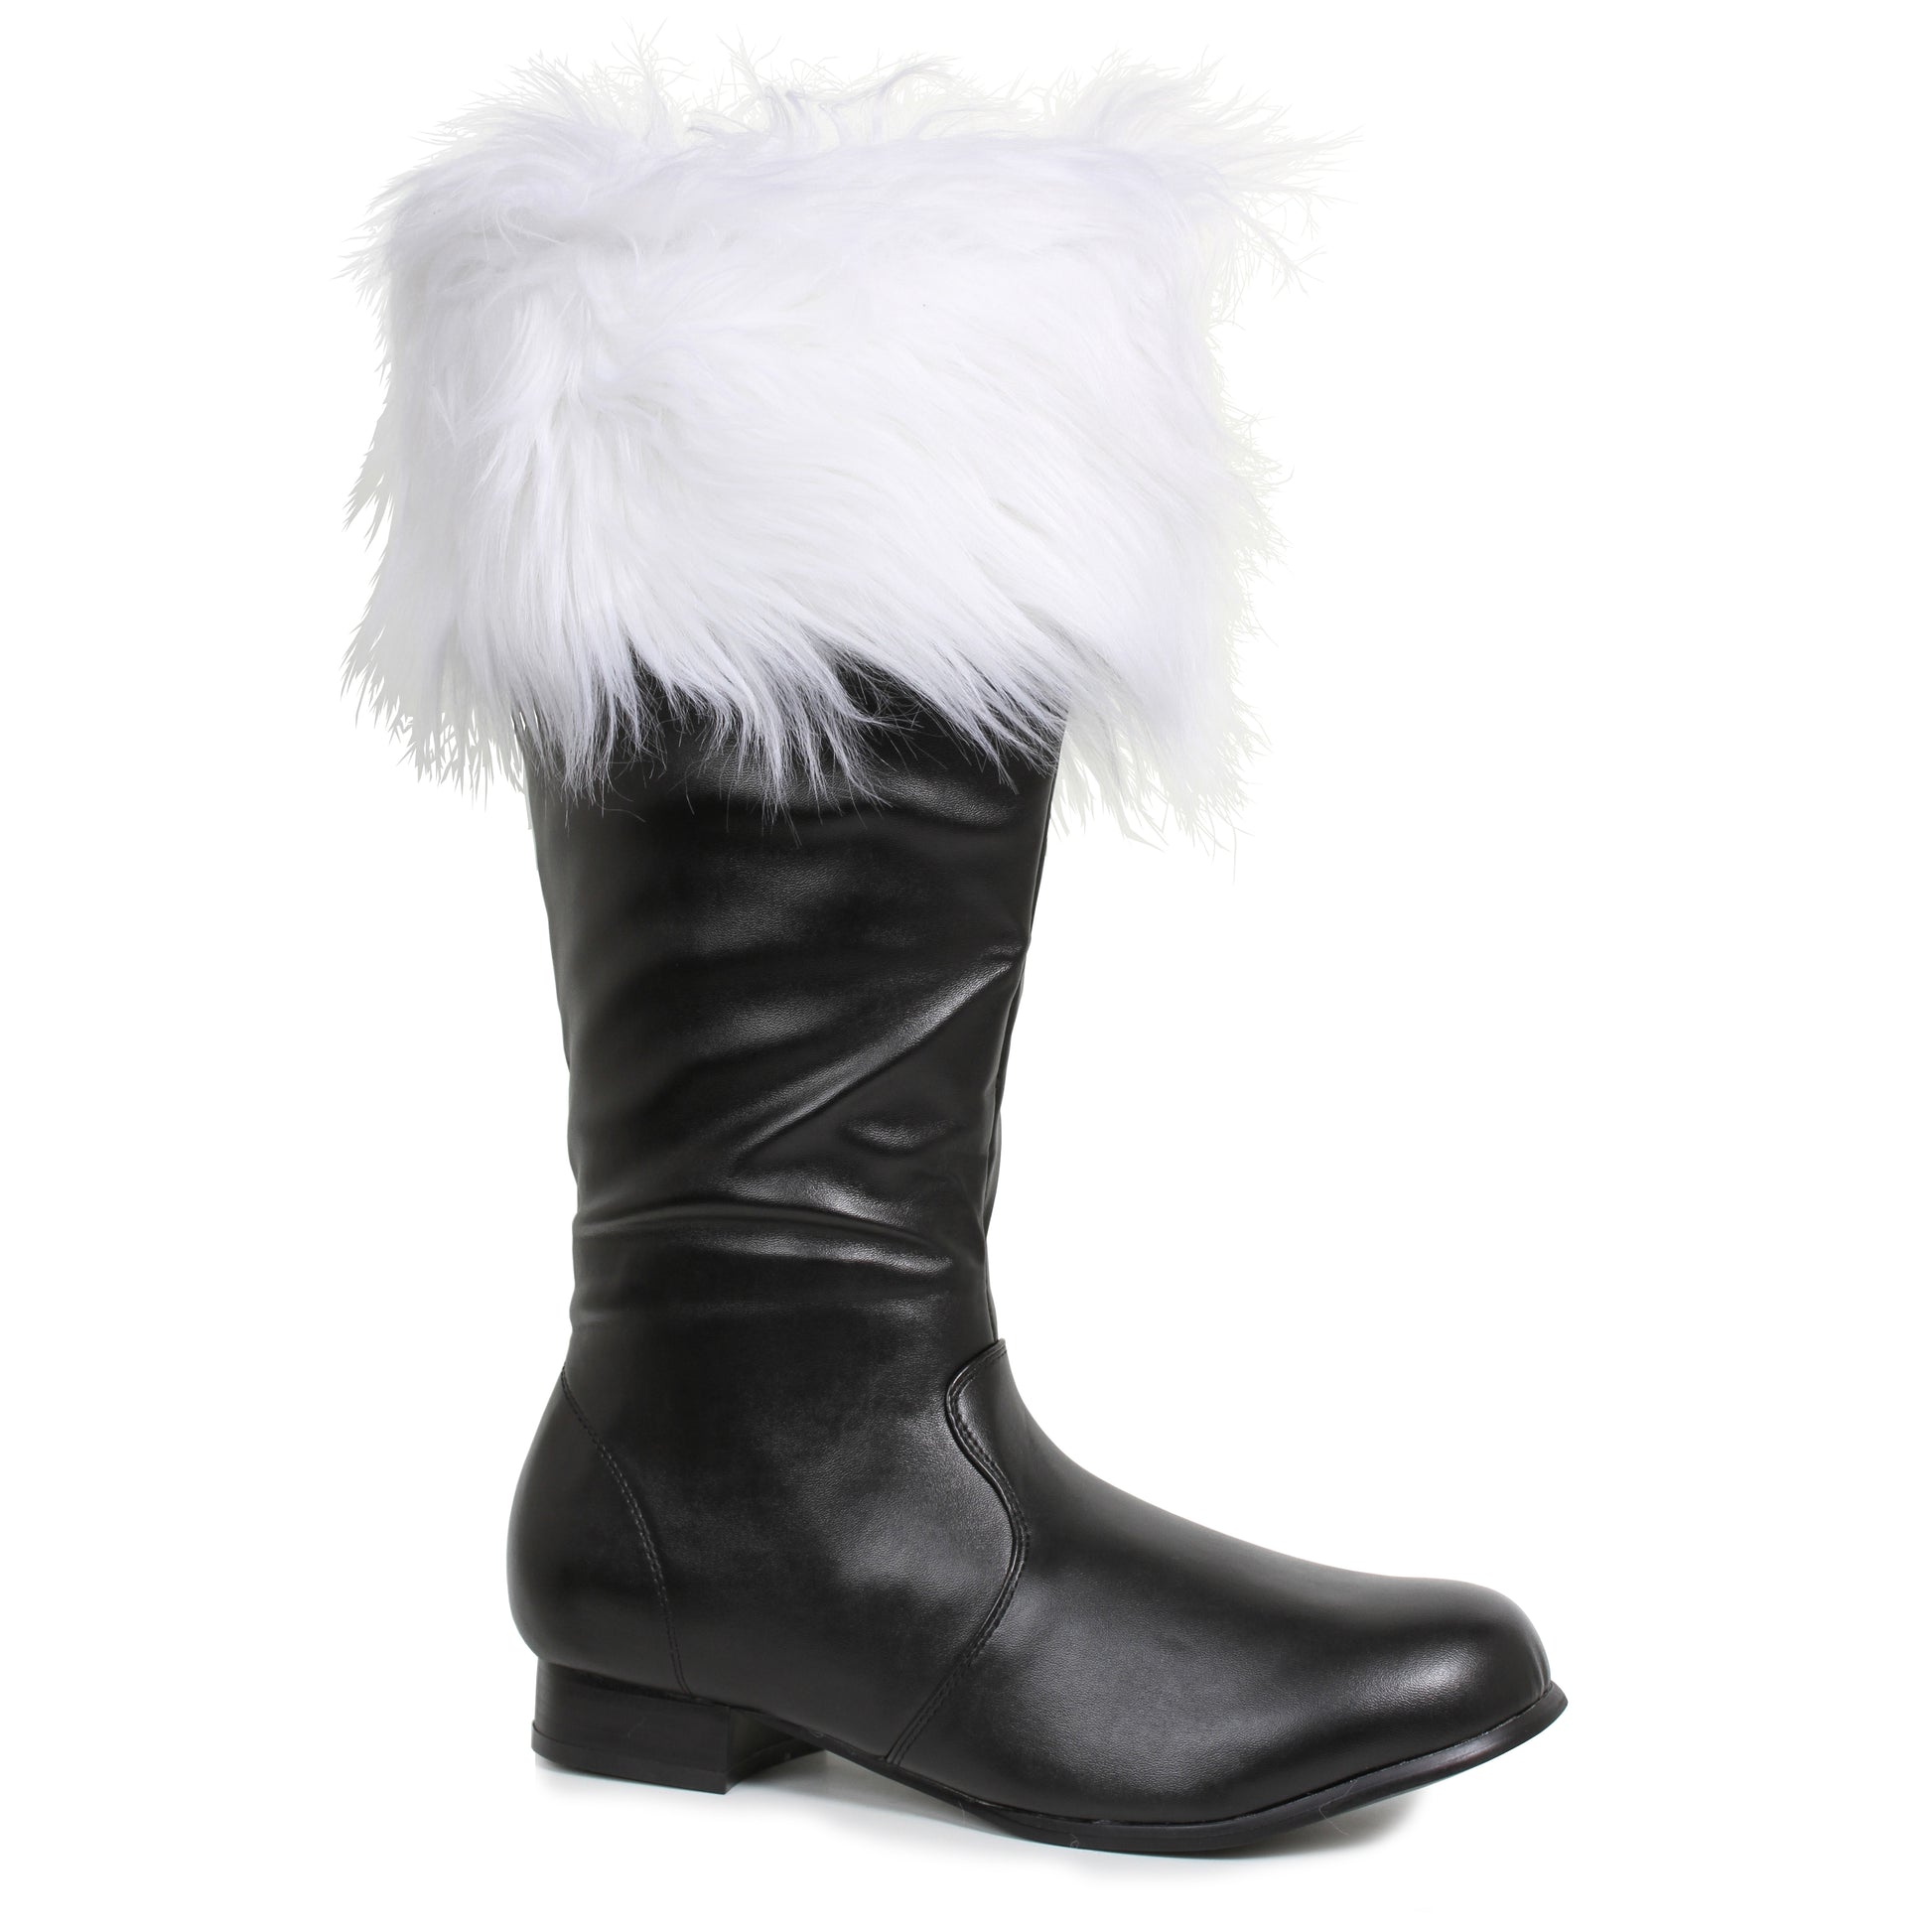 121-NICK 1031 Shoes 1" Heel Boot with Fur. (Mens Sizes) KNEE HIGH